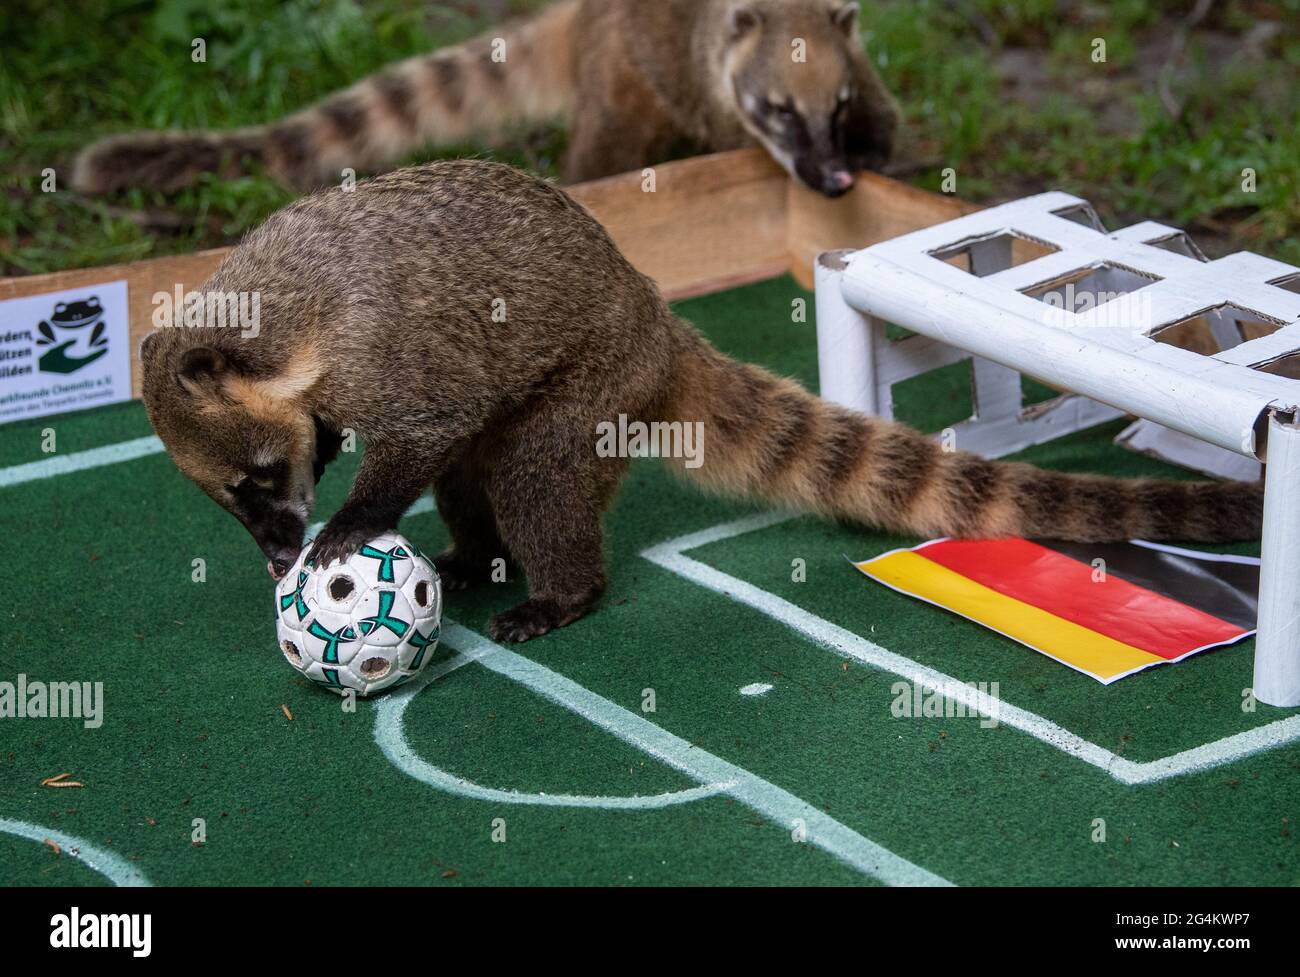 Chemnitz, Germany. 22nd June, 2021. The coatis in Chemnitz Zoo work on a ball filled with flour beetle larvae on a miniature football pitch. In the process, they predict the outcome of the match against Hungary before the German national football team's last European Championship preliminary round match and guess a draw. Credit: Hendrik Schmidt/dpa-Zentralbild/ZB/dpa/Alamy Live News Stock Photo